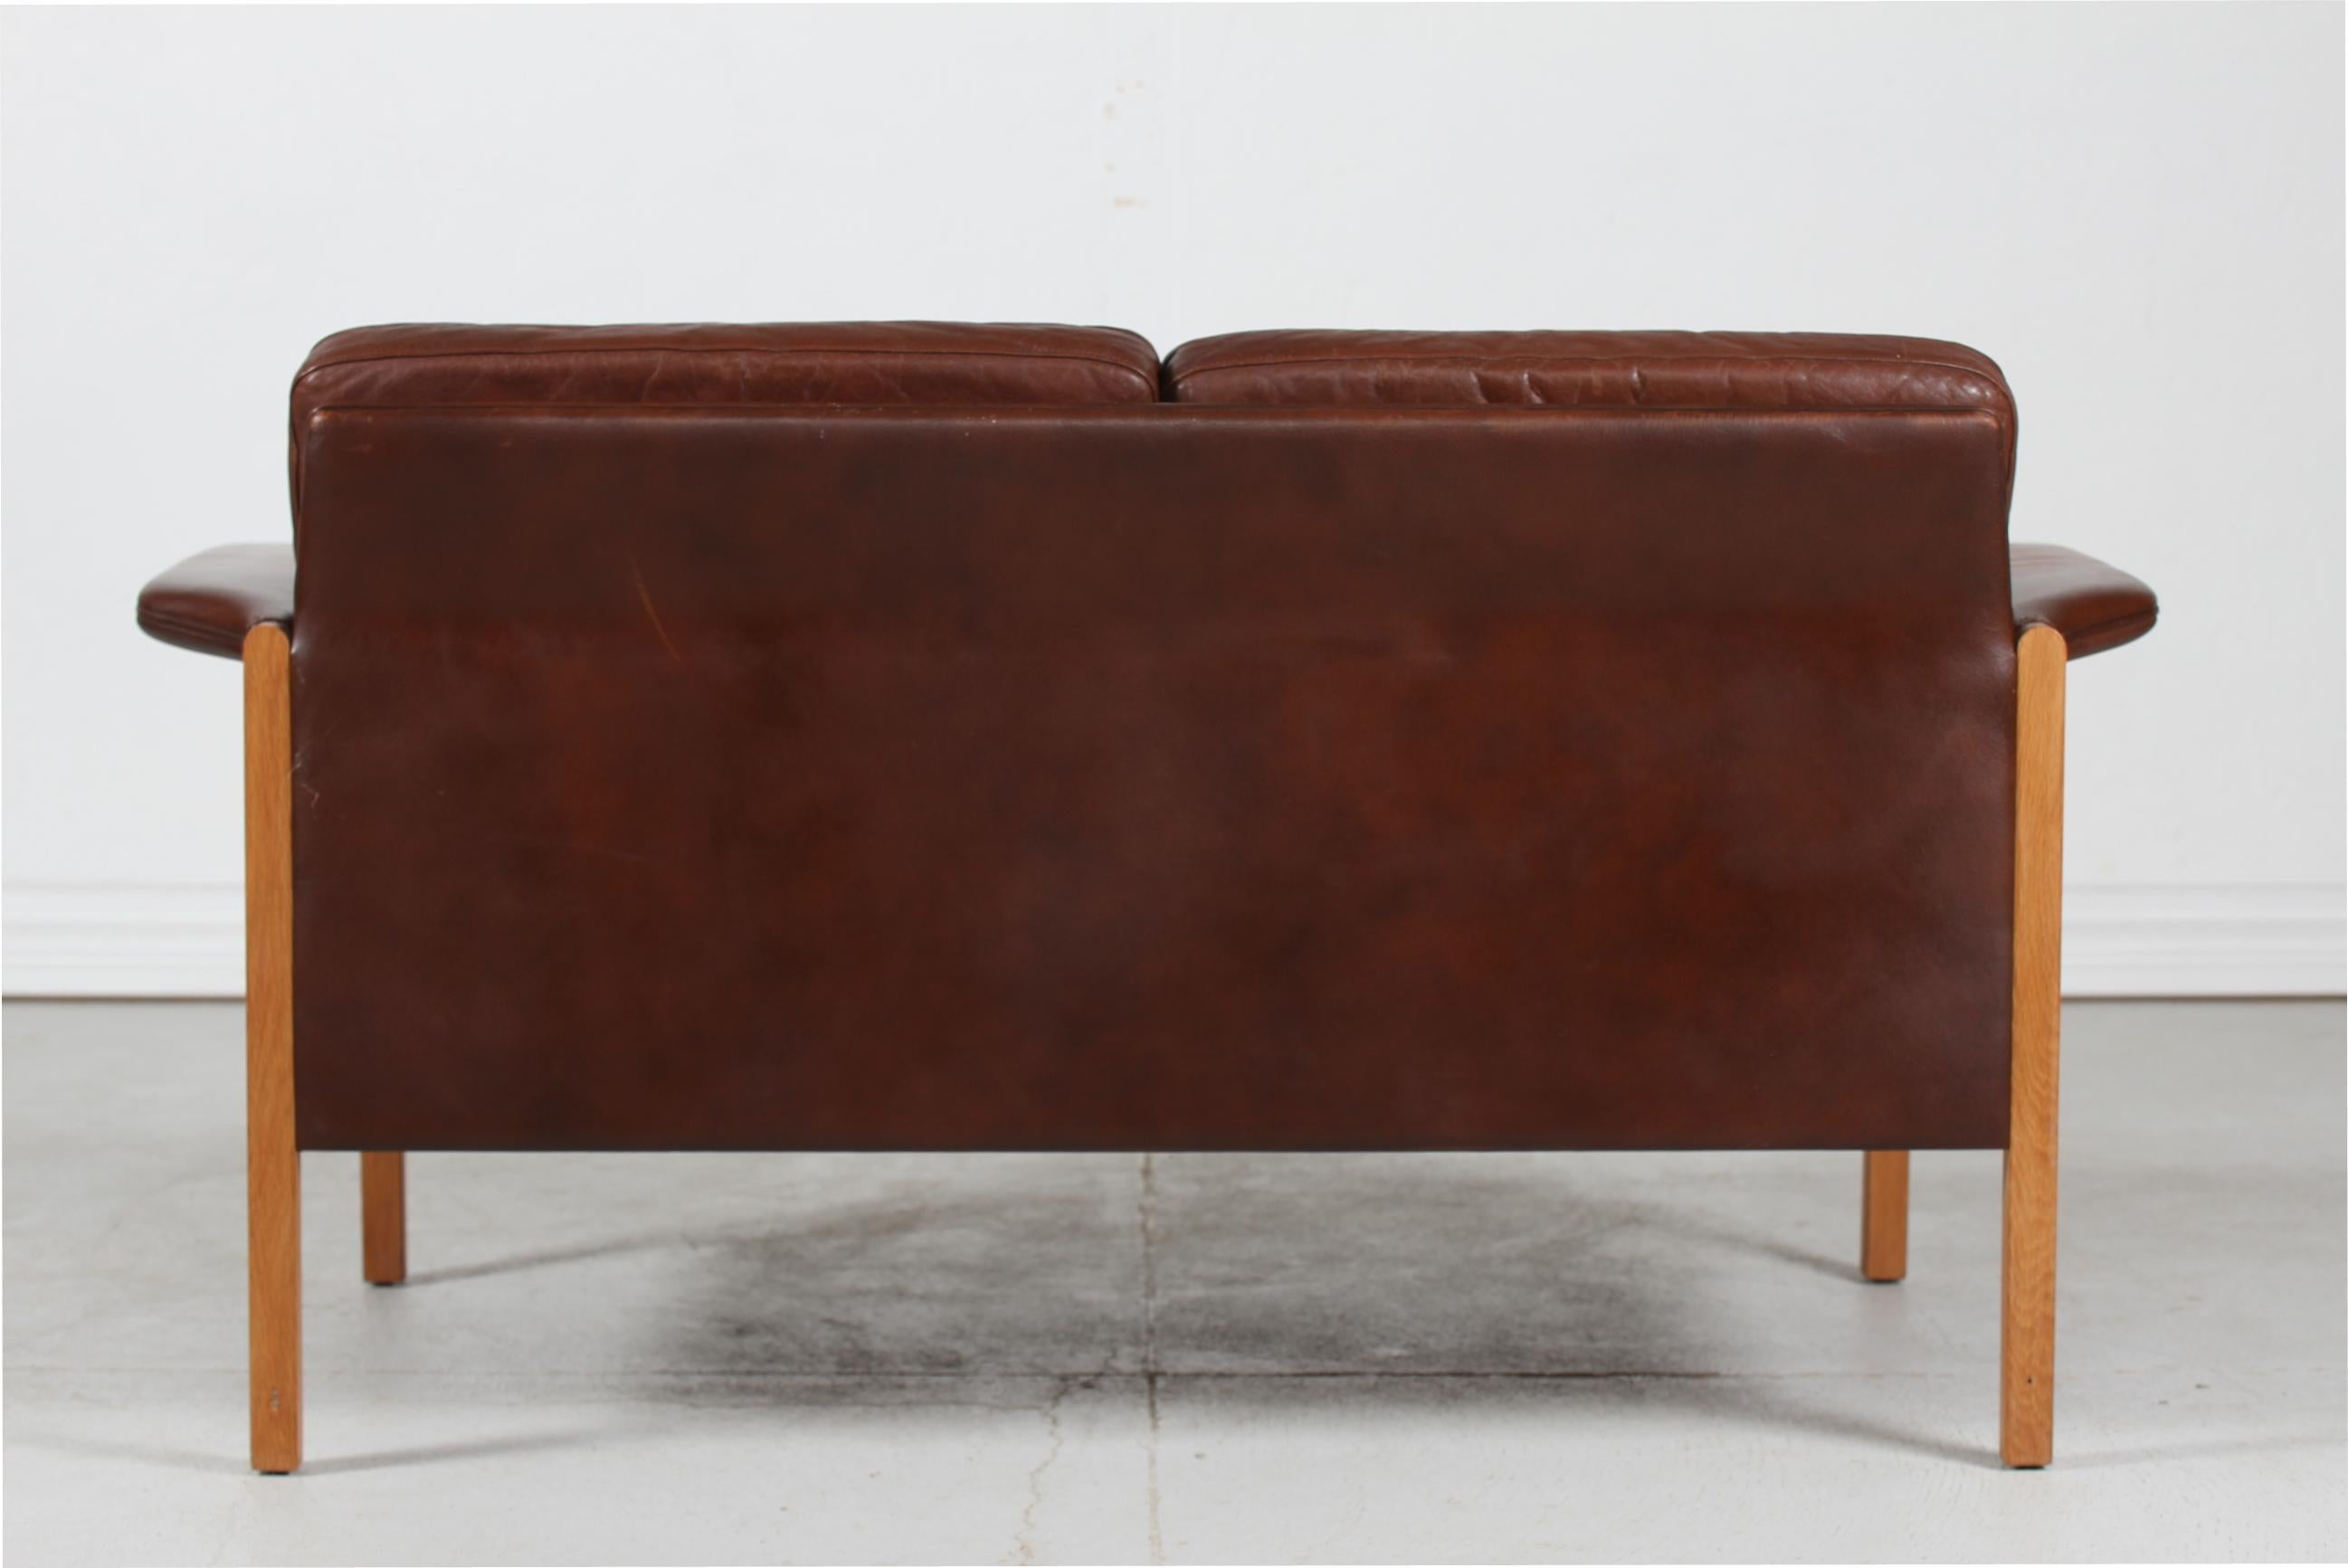 Late 20th Century Finn Juhl style Two-Seat Sofa with Dark Cognac-Colored Leather Made in Denmark For Sale